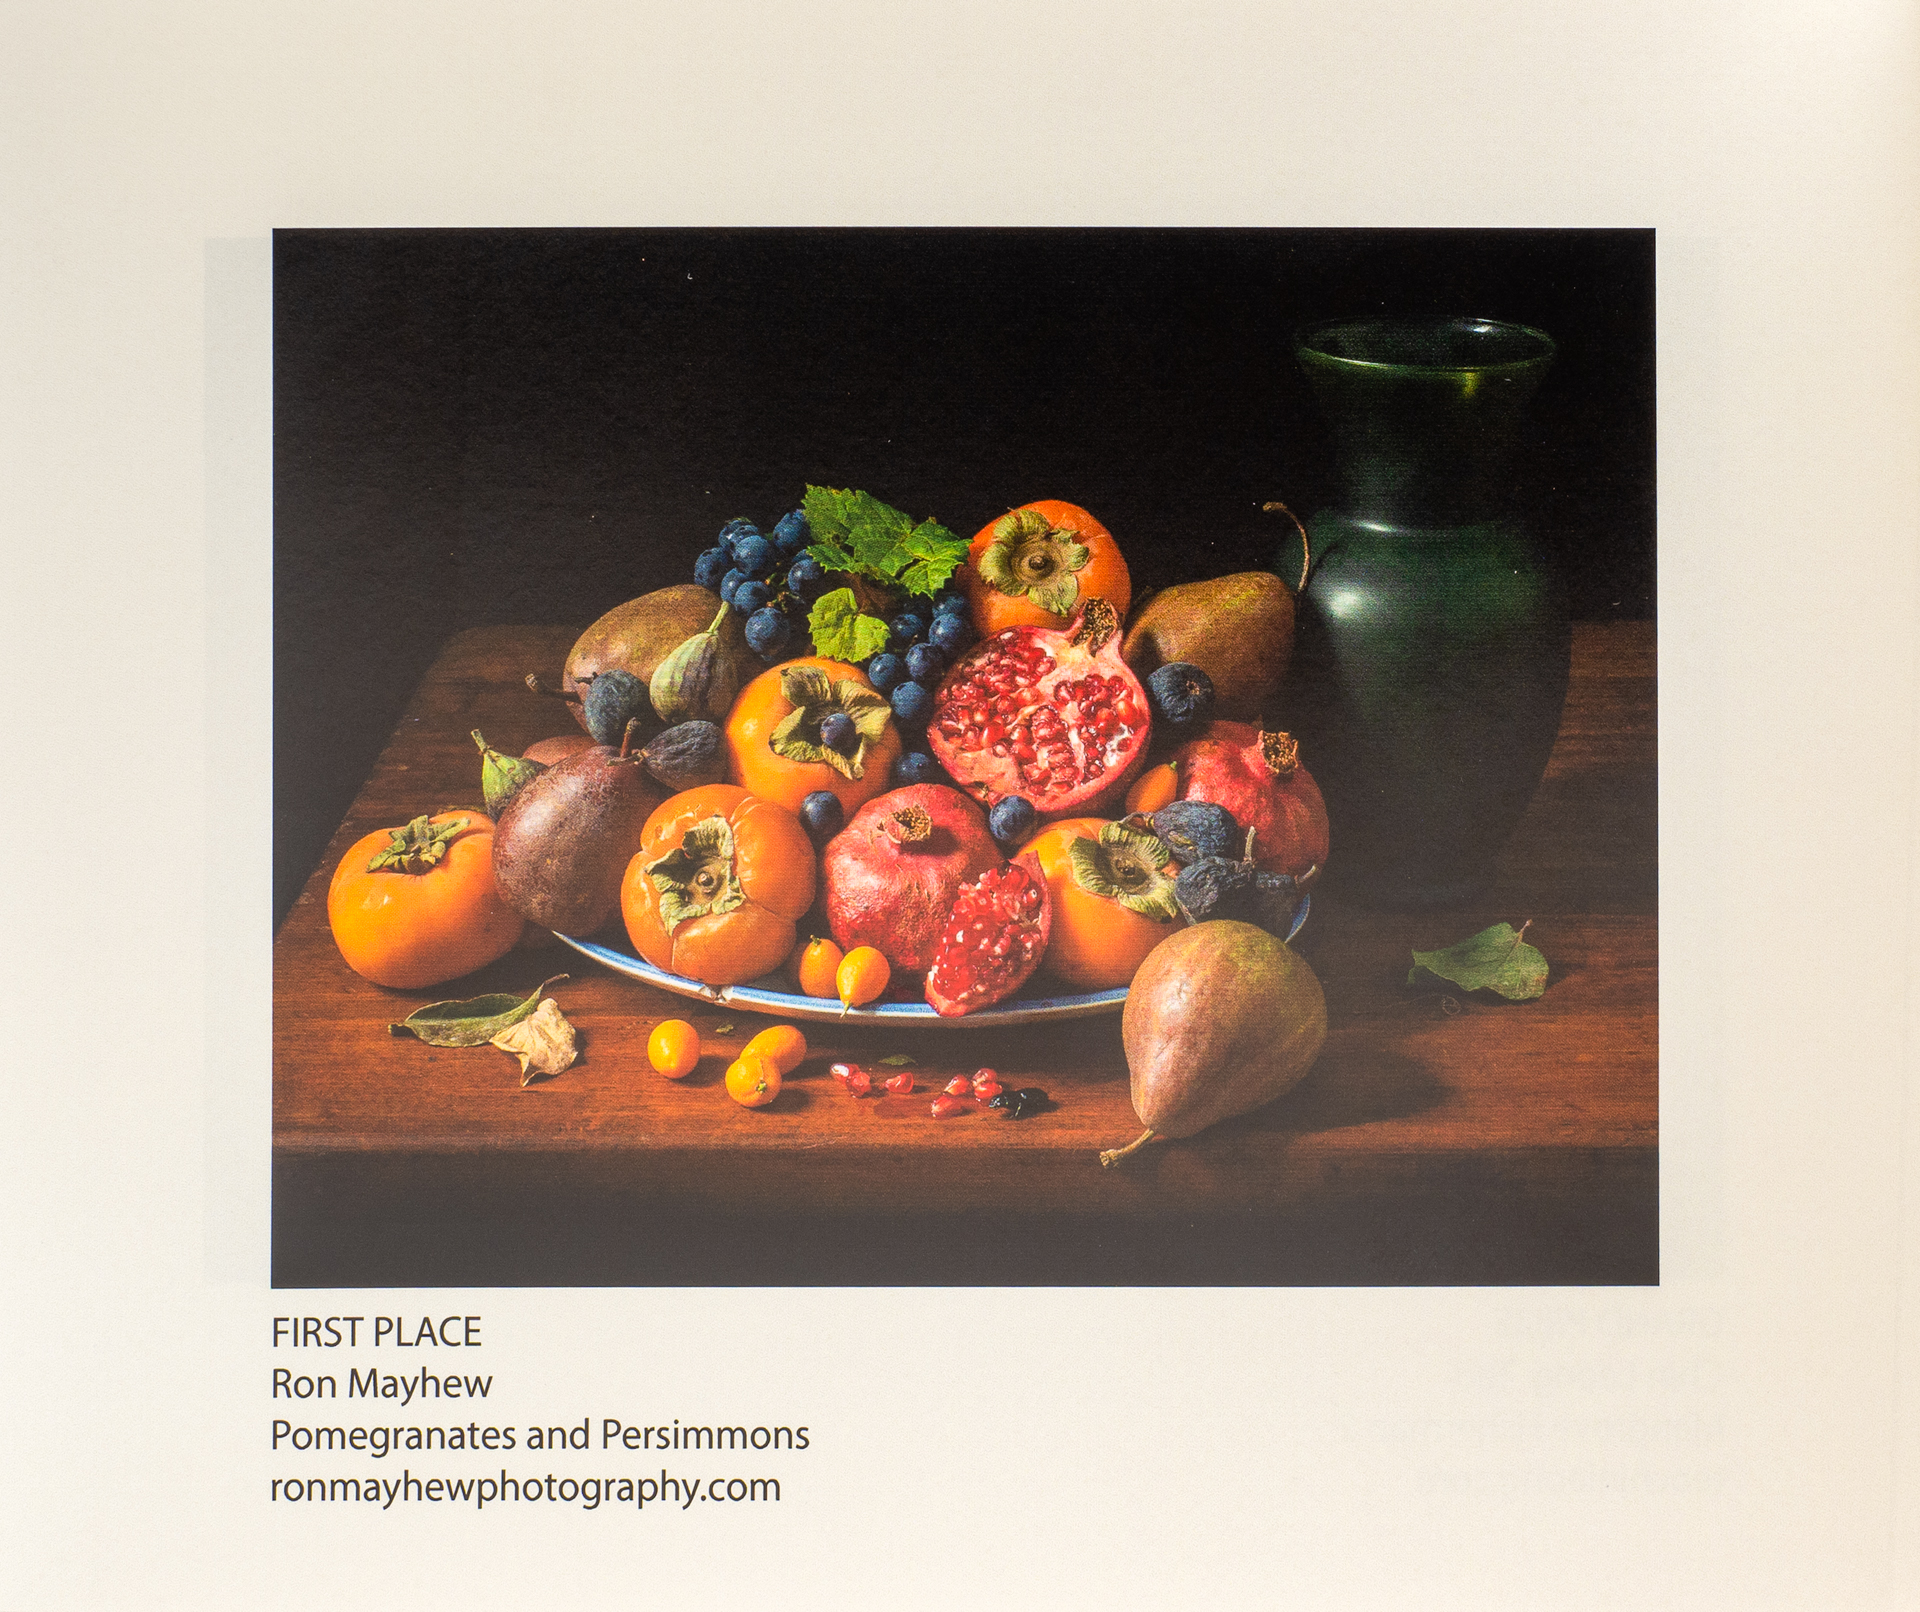 Pomegranate and Persimmons First Place award at the New York City Center for Photographic Art